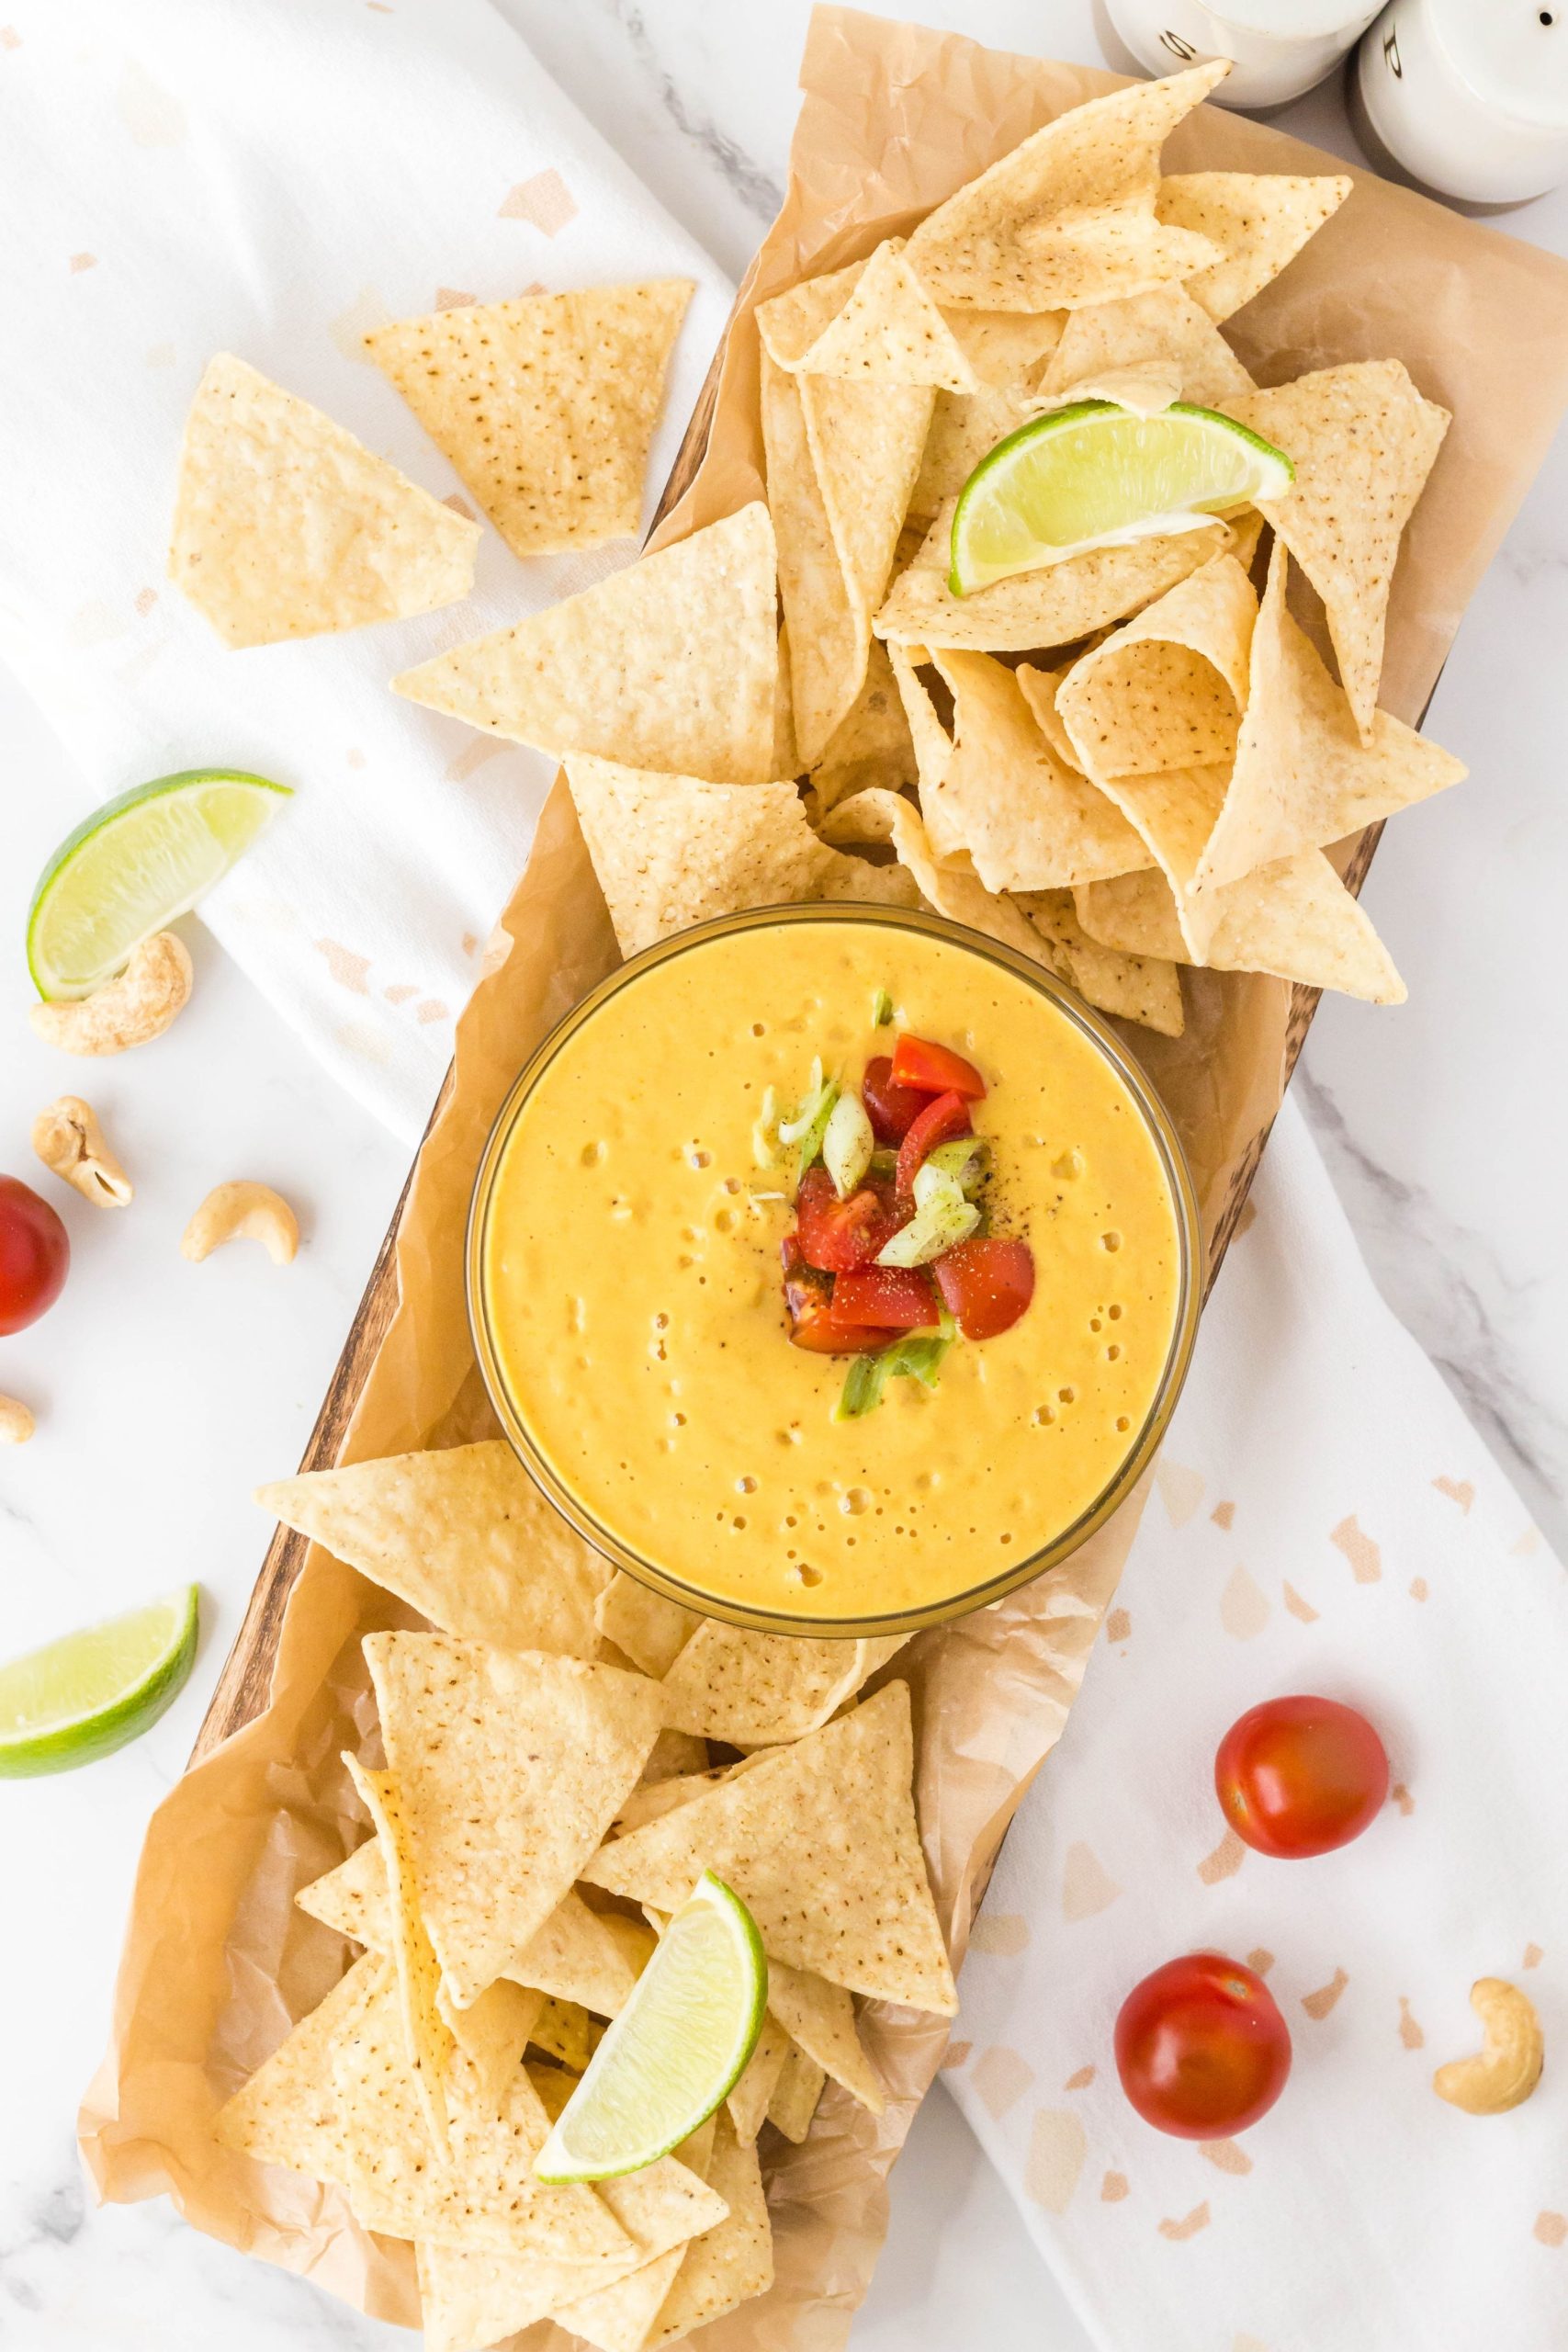 This Vegan Queso recipe is so simple and easy to make. This recipe is oil-free giving you a perfect whole-food plant-based queso option. It's a delicious appetizer that will have you dipping and craving more. Perfect for parties, gatherings, holiday events, and just "because".